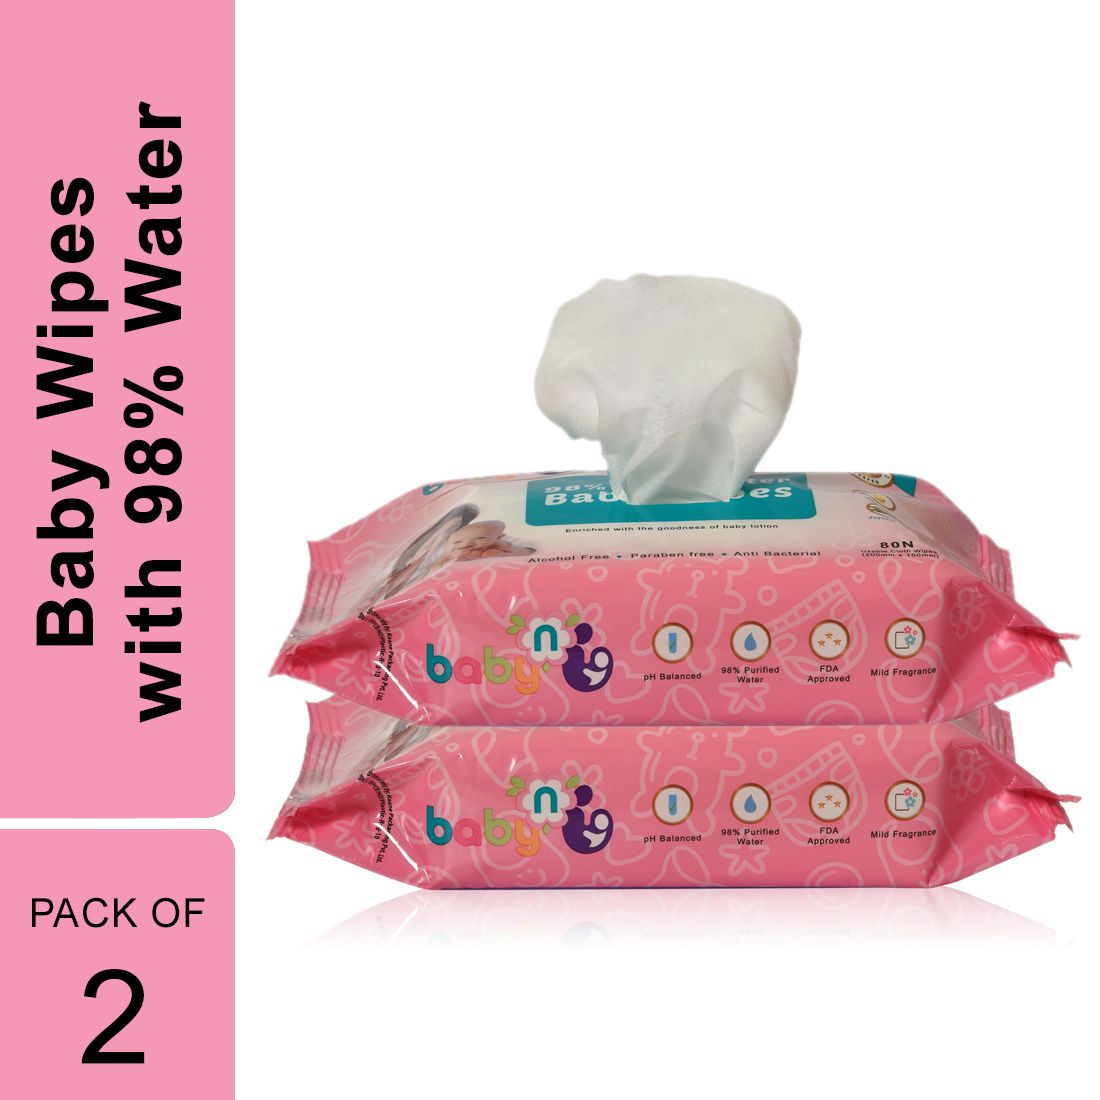     			Babynu 98% Pure water wipes (80 wipes/pack) (Pack of 2)